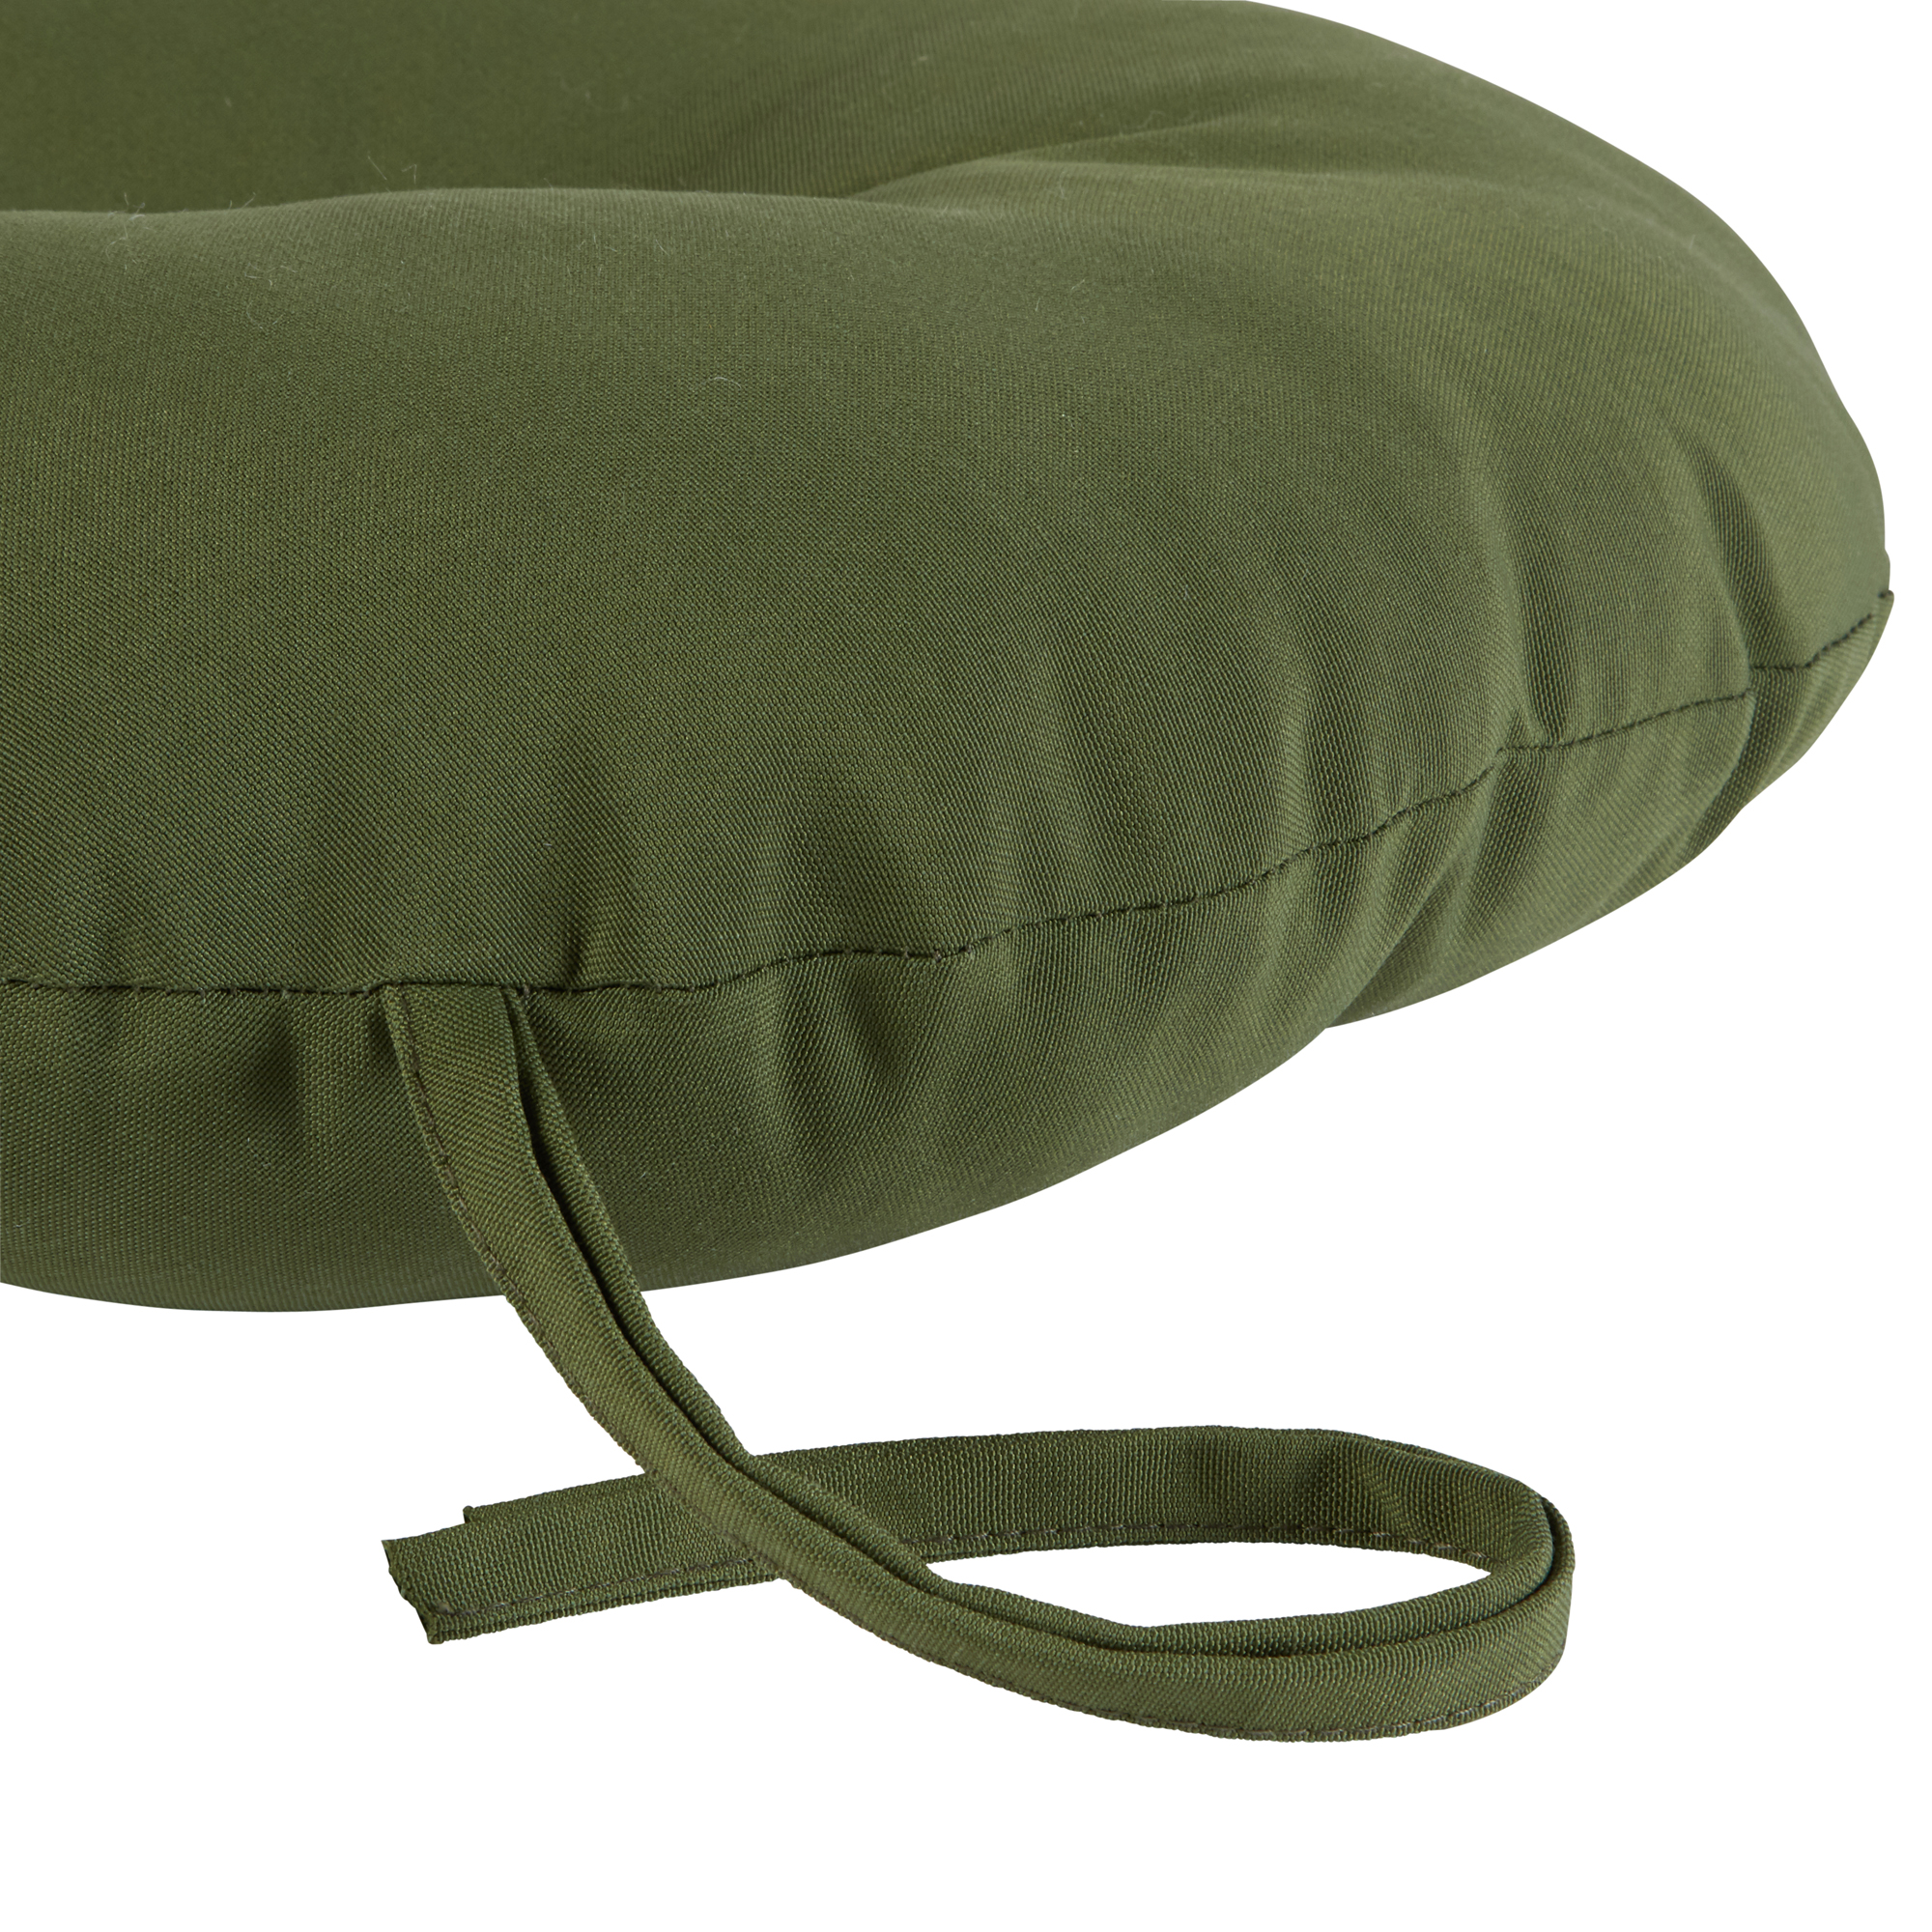 Greendale Home Fashions Summerside Green 15 in. Round Outdoor Reversible Bistro Seat Cushion (Set of 2) - image 5 of 6